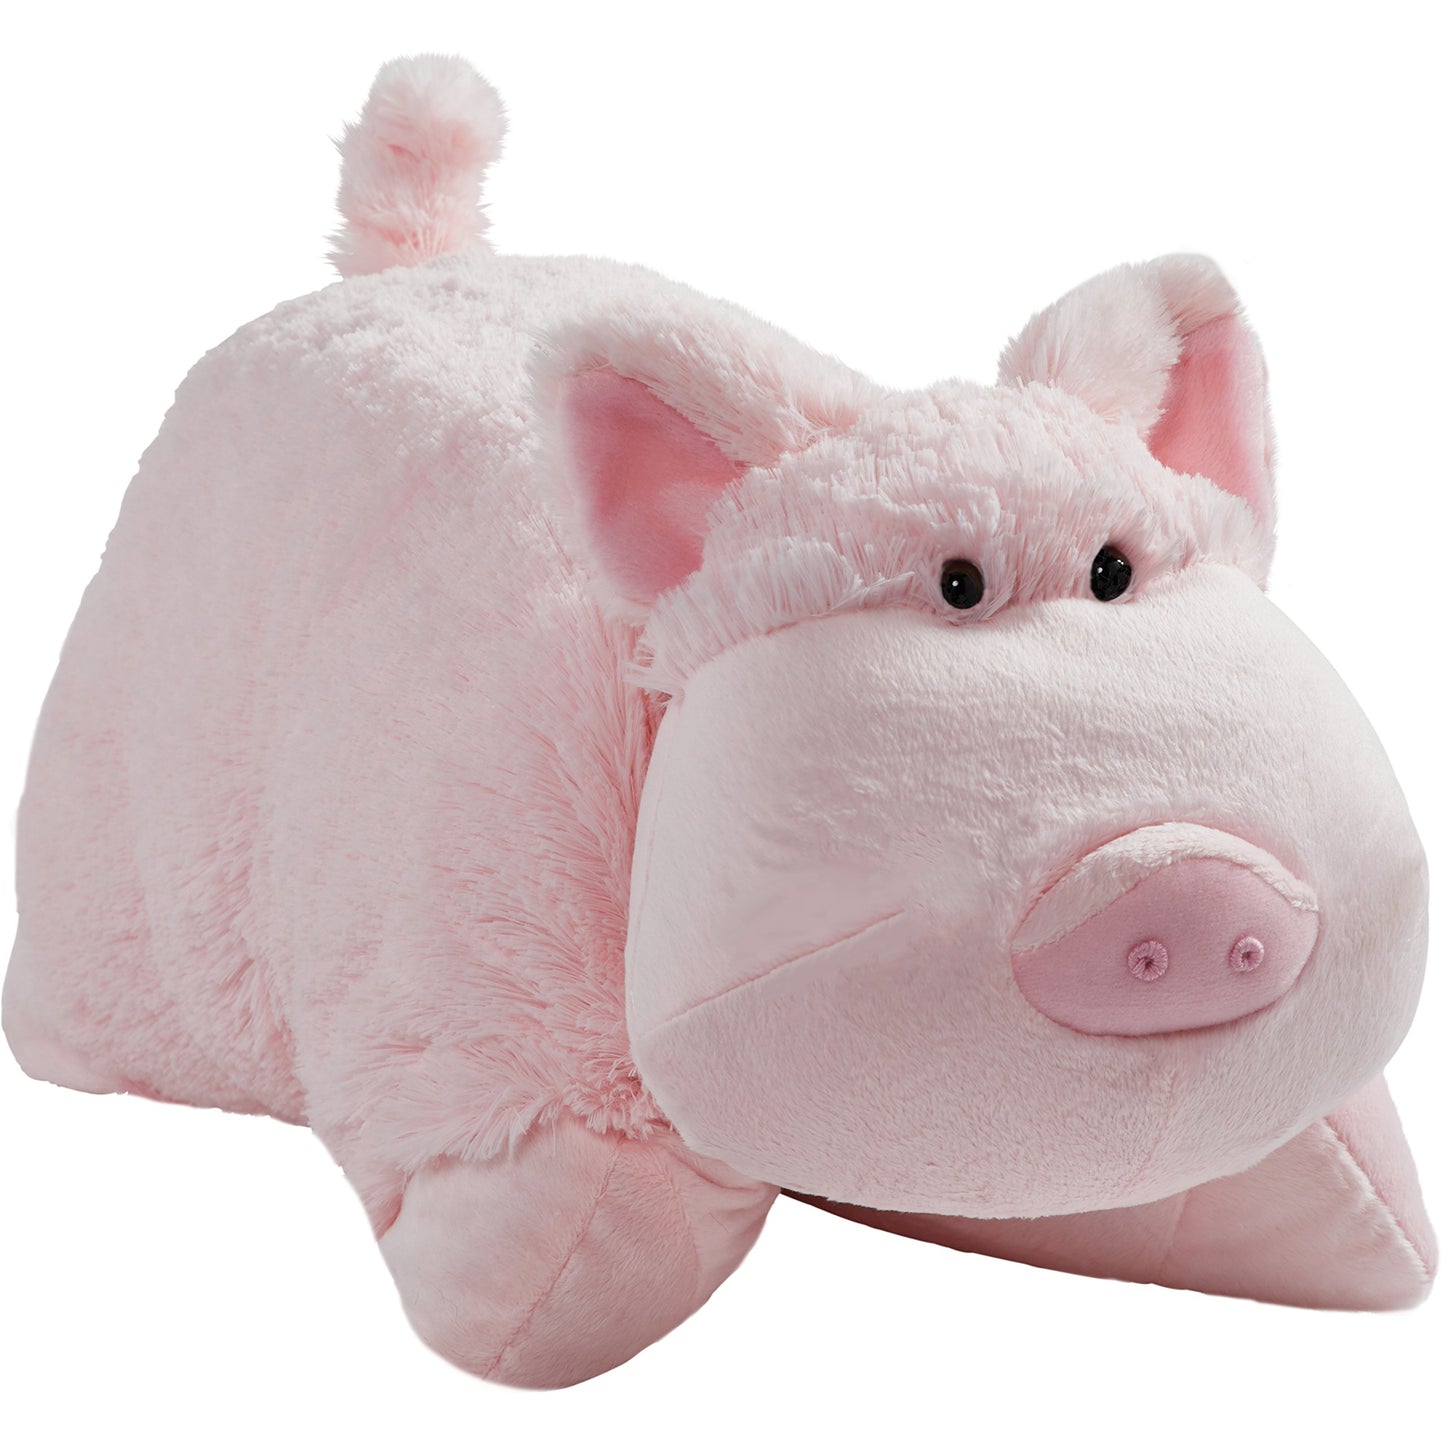 Pillow Pets Originals, Wiggly Pig, 18" Stuffed Animal Plush Toy , White